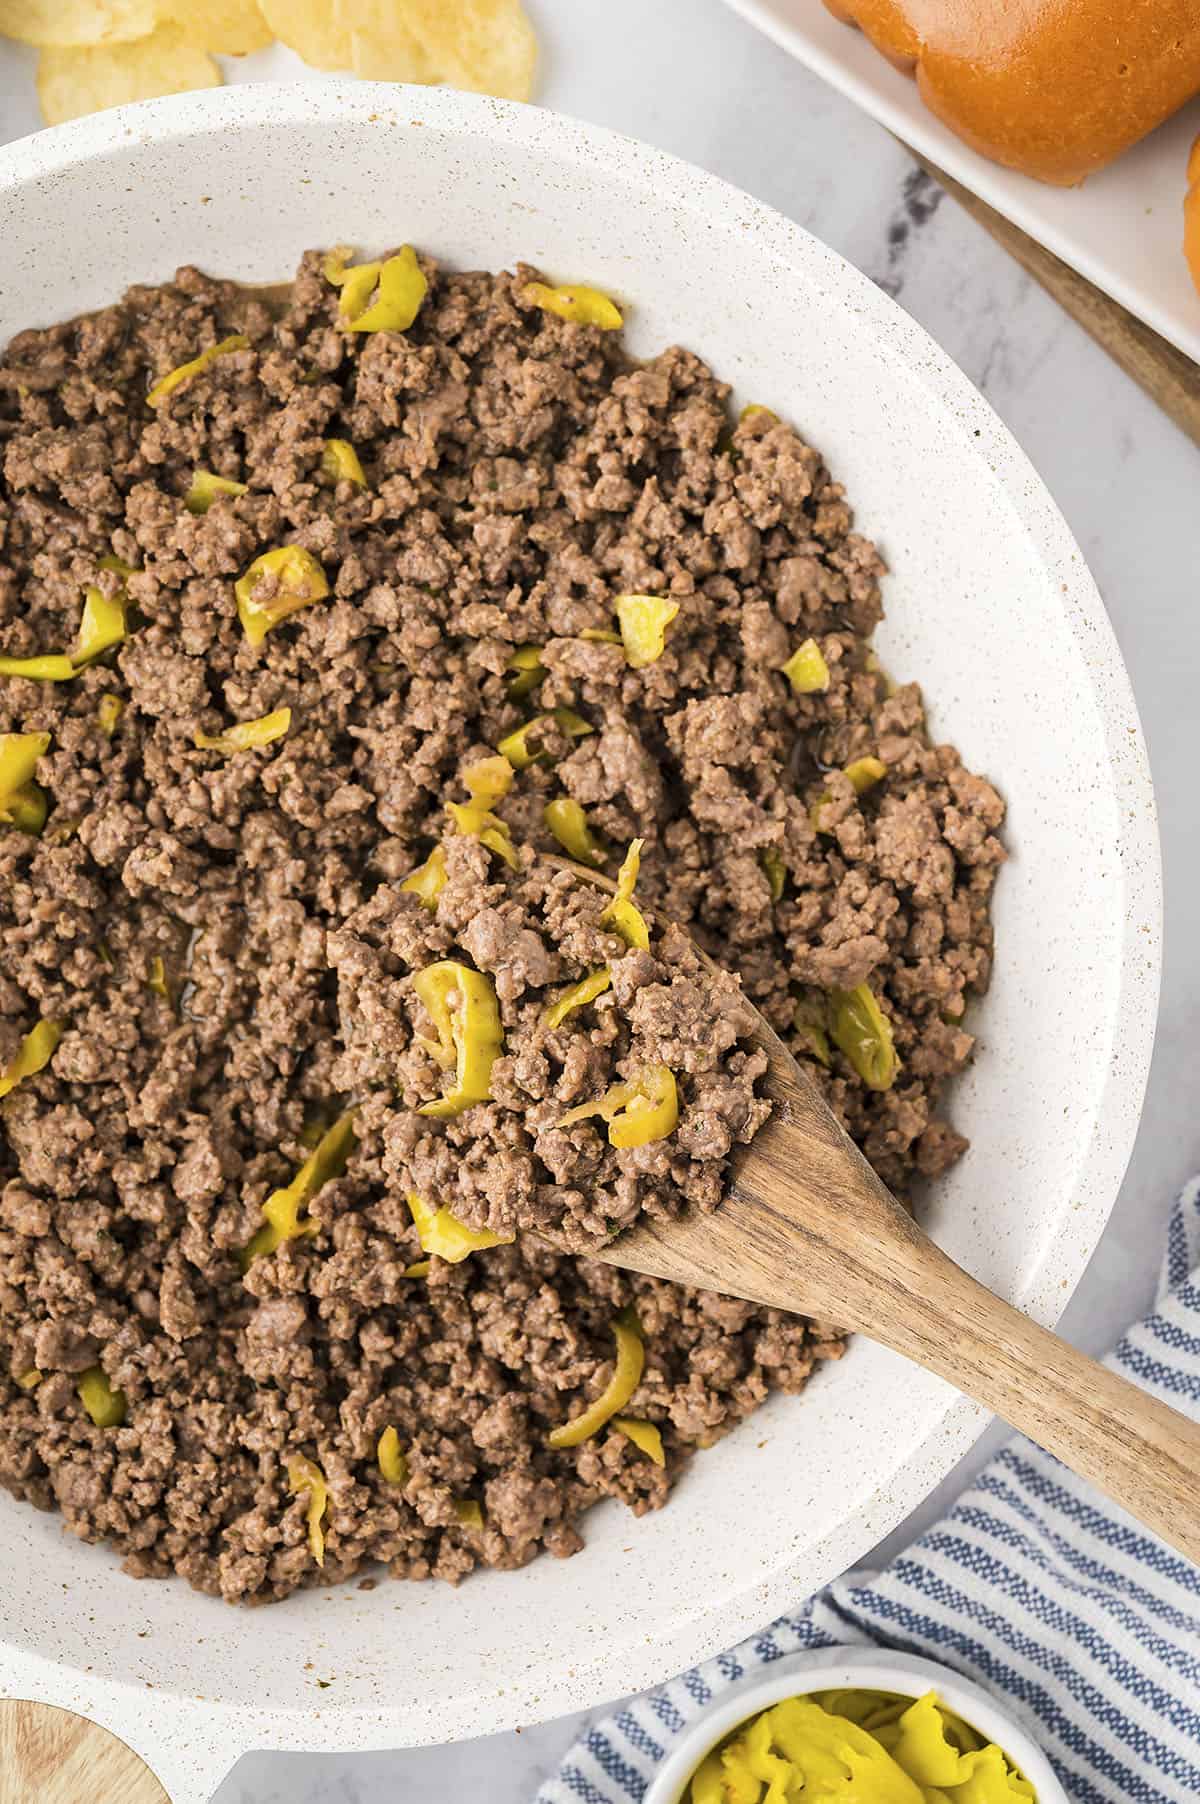 Ground beef with pepperoncini peppers in skillet.